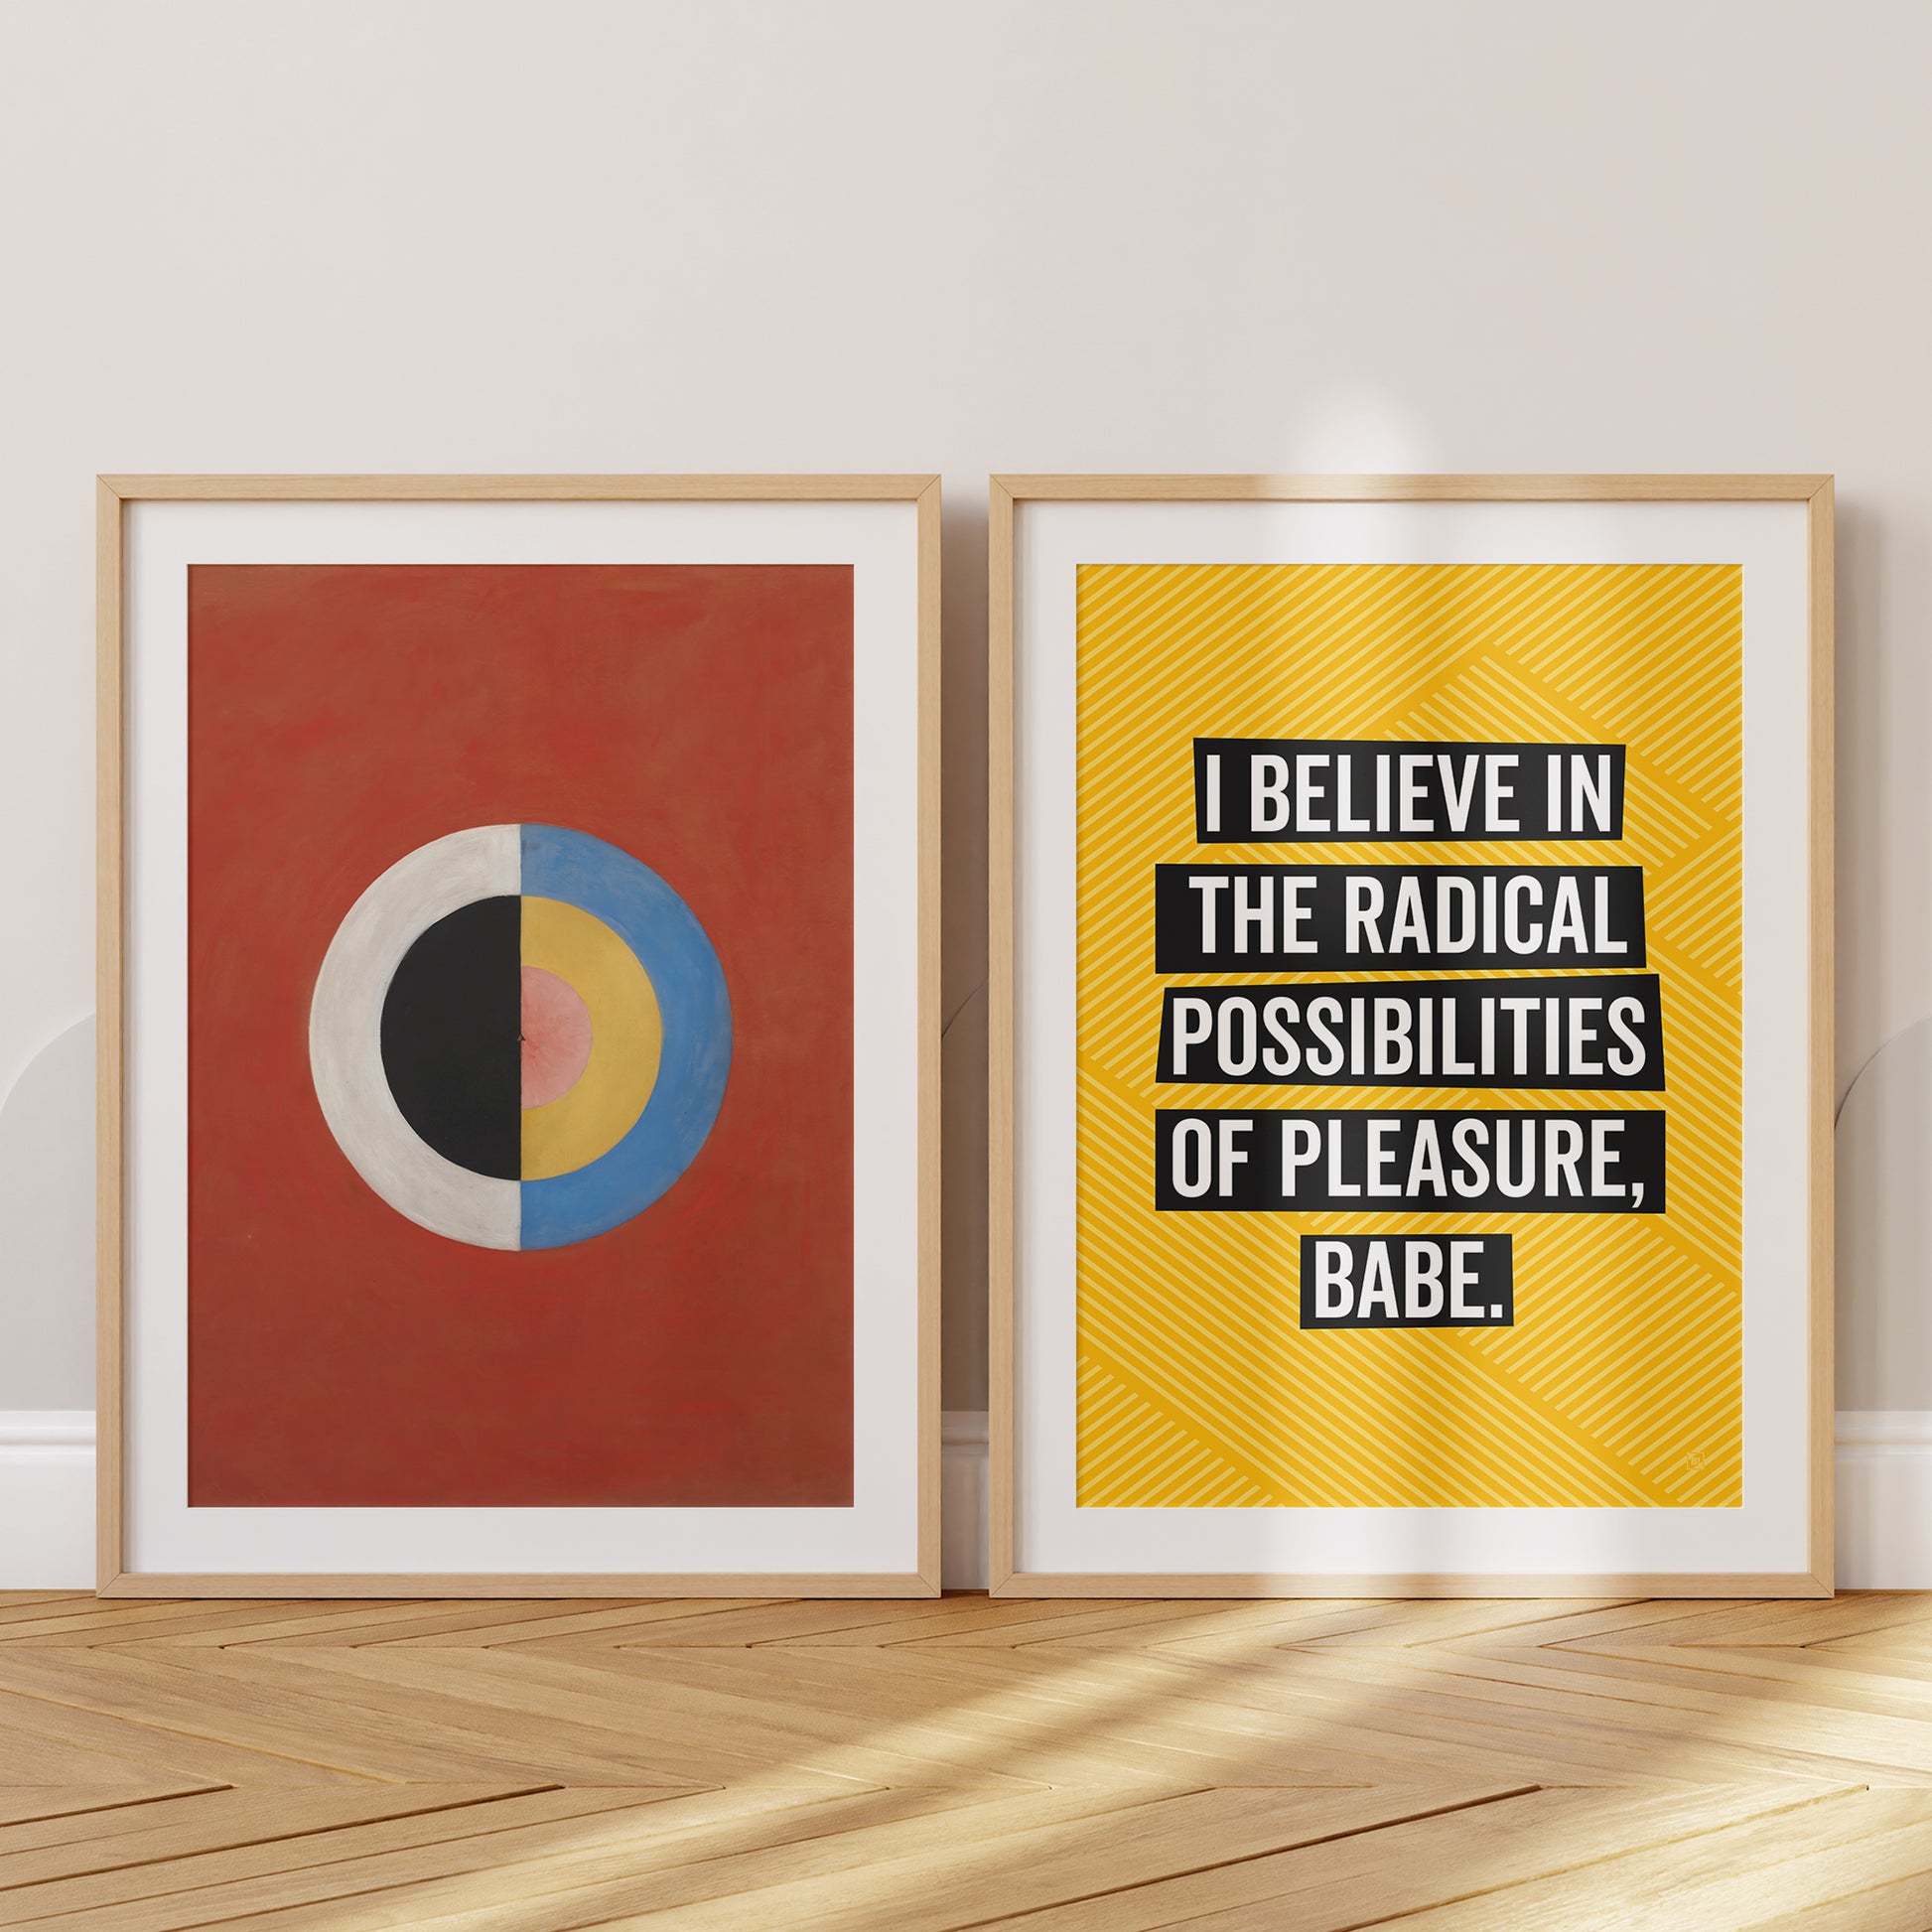 Be inspired by our golden yellow Bikini Kill "I Believe in the Radical Possibilities of Pleasure Babe" lyrics art print! This artwork has been printed using the giclée process on archival acid-free paper and is presented in a set of two oak frames with passe-partout that perfectly captures its timeless beauty in every detail.